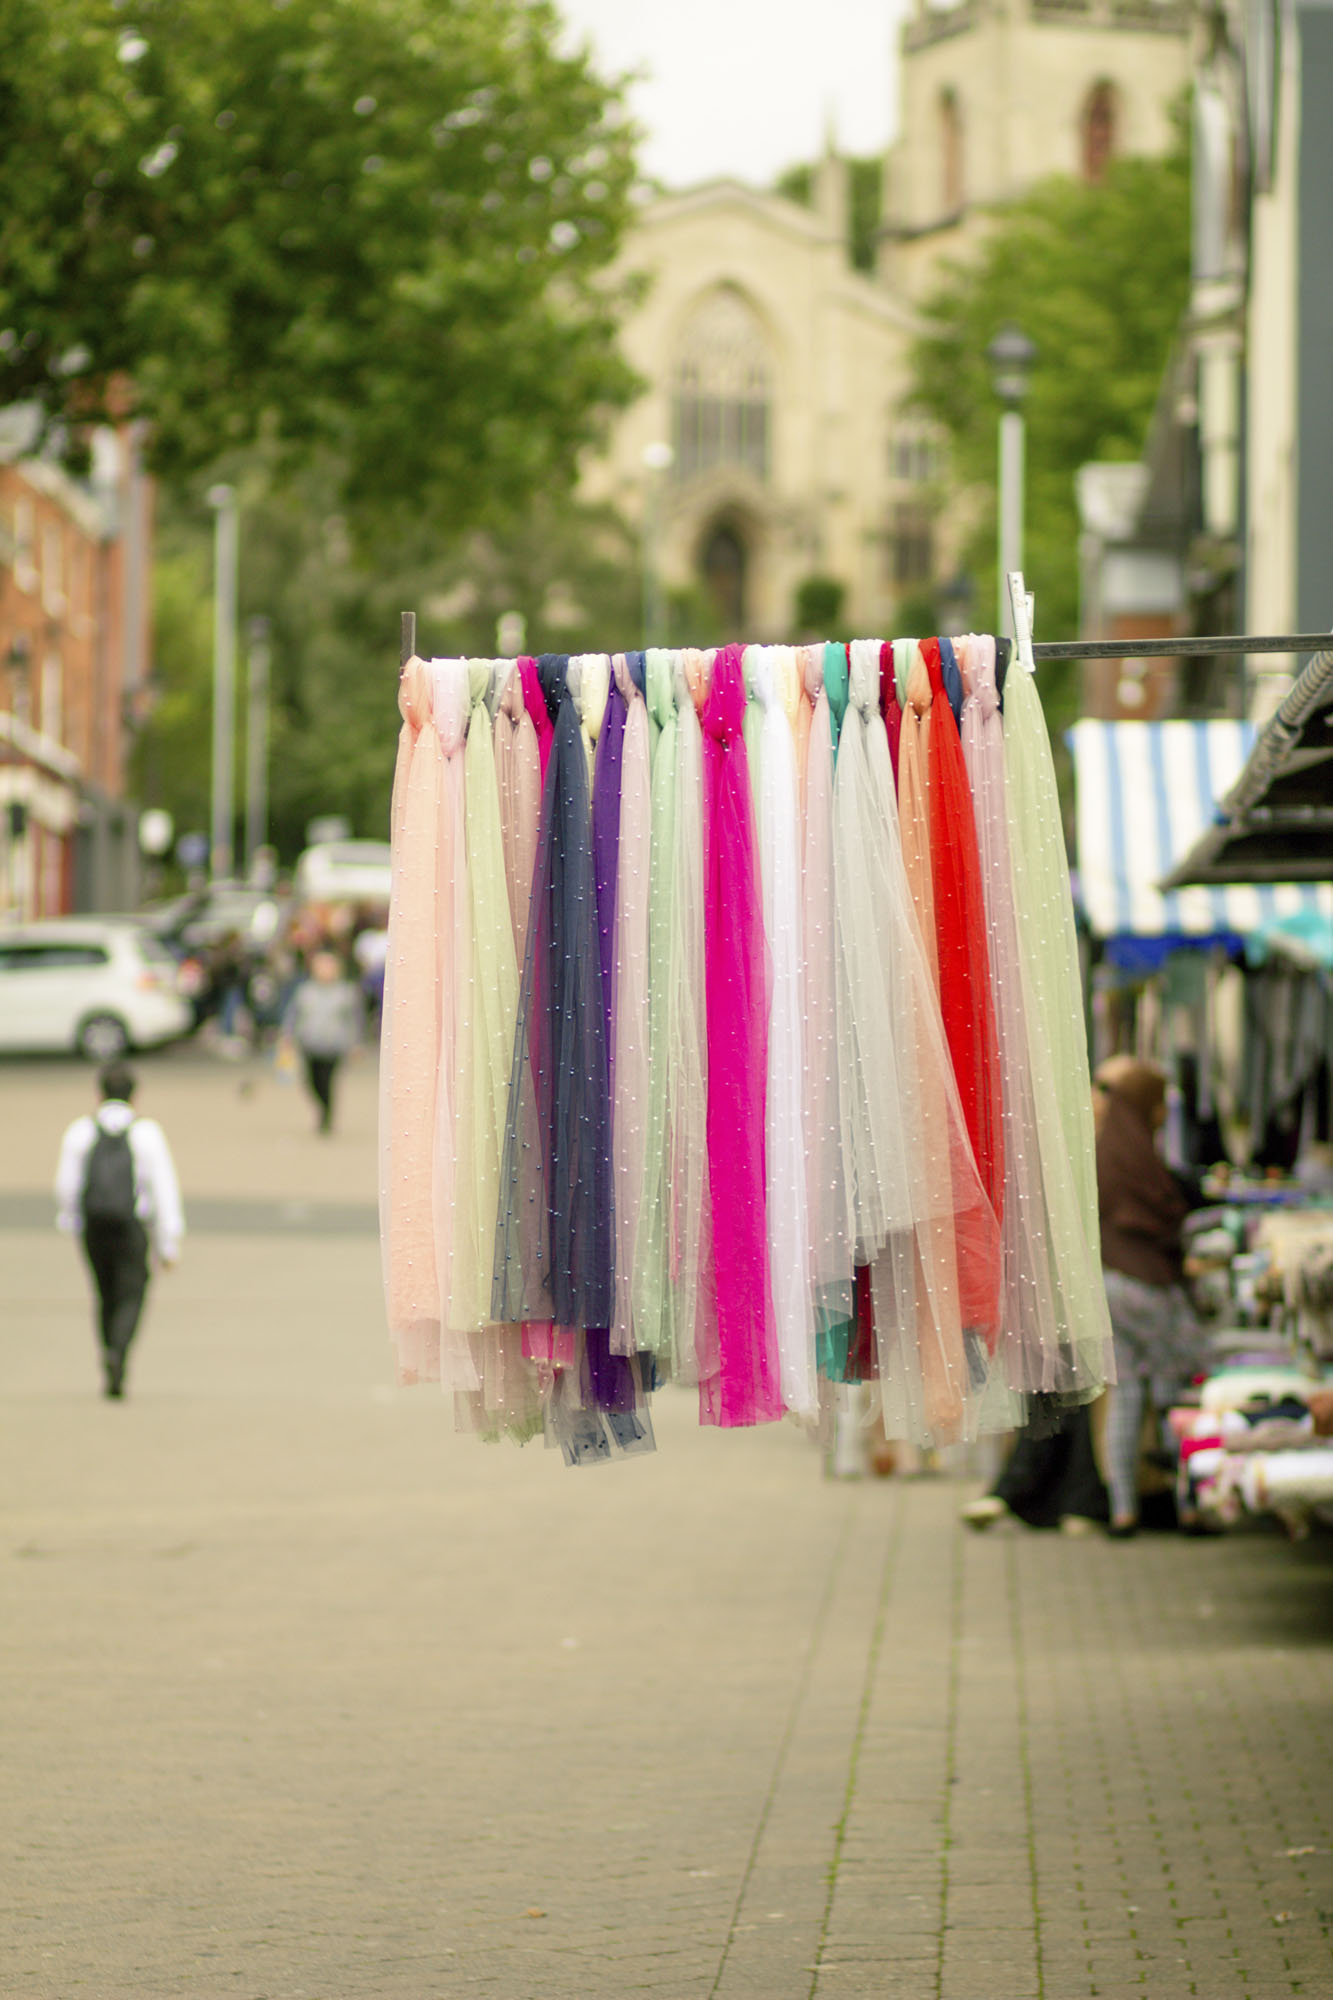 A rail of colourful material on display outside a market stall.